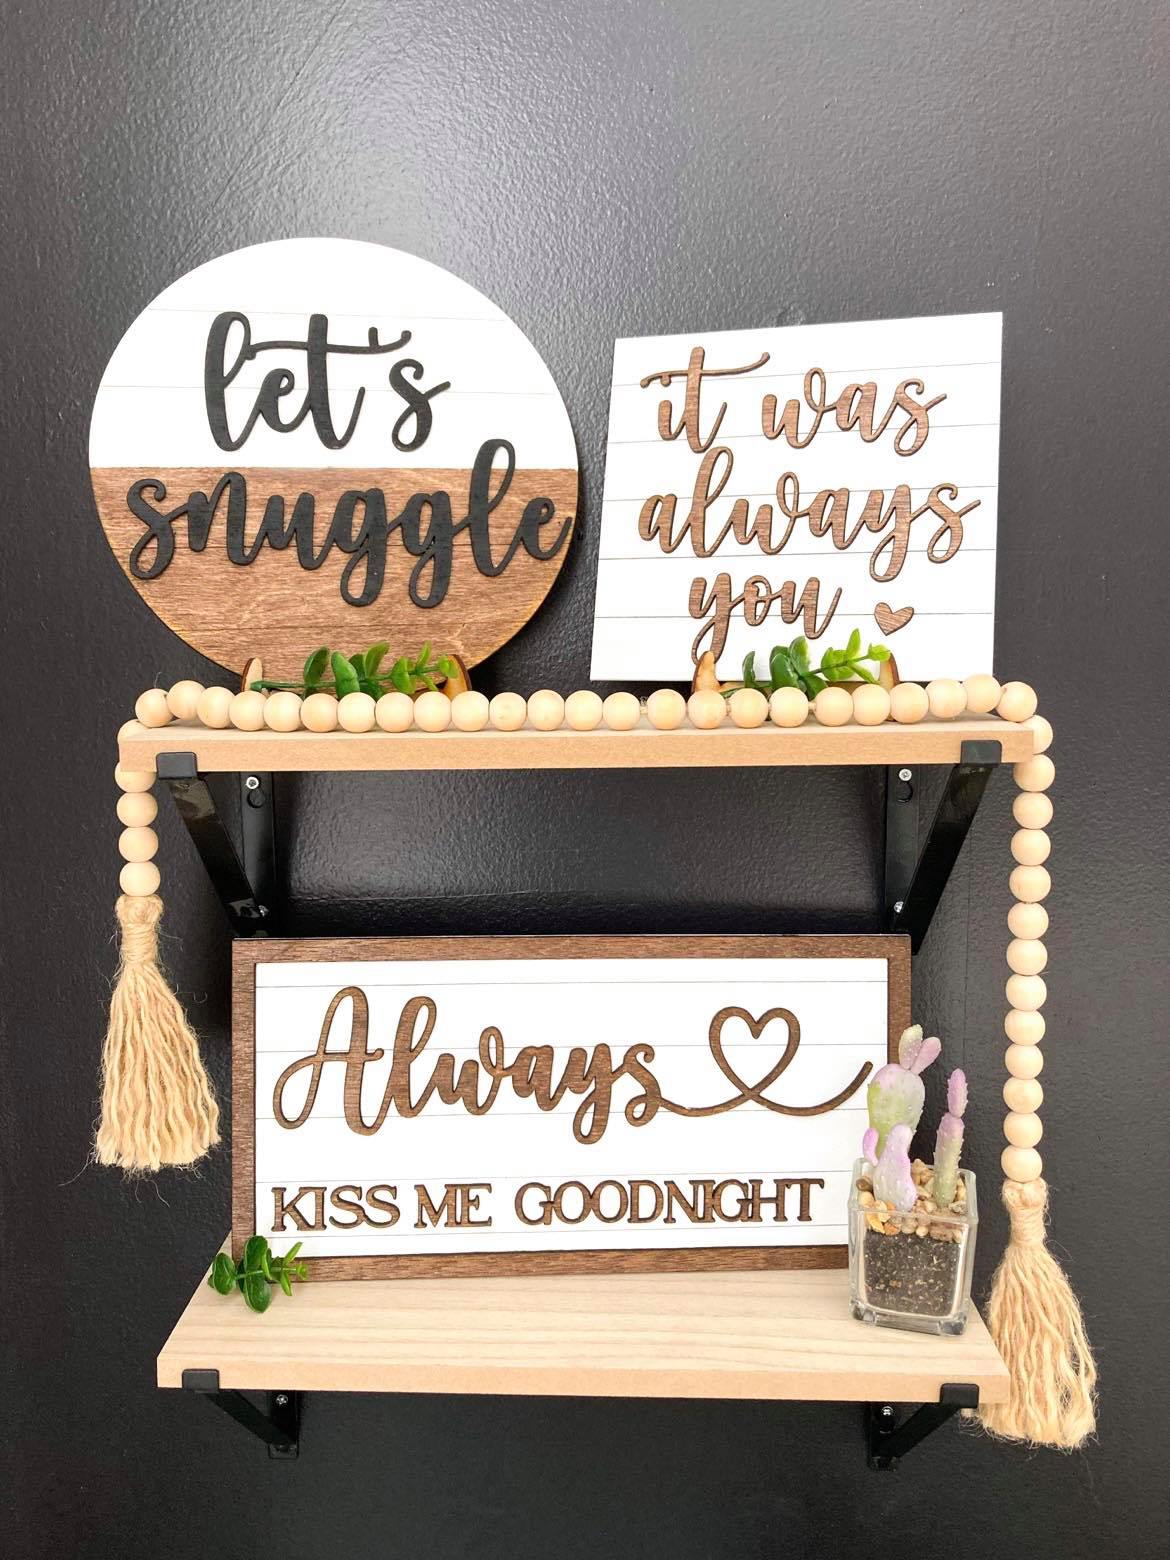 3D Tiered Tray Decor - Lets Snuggle